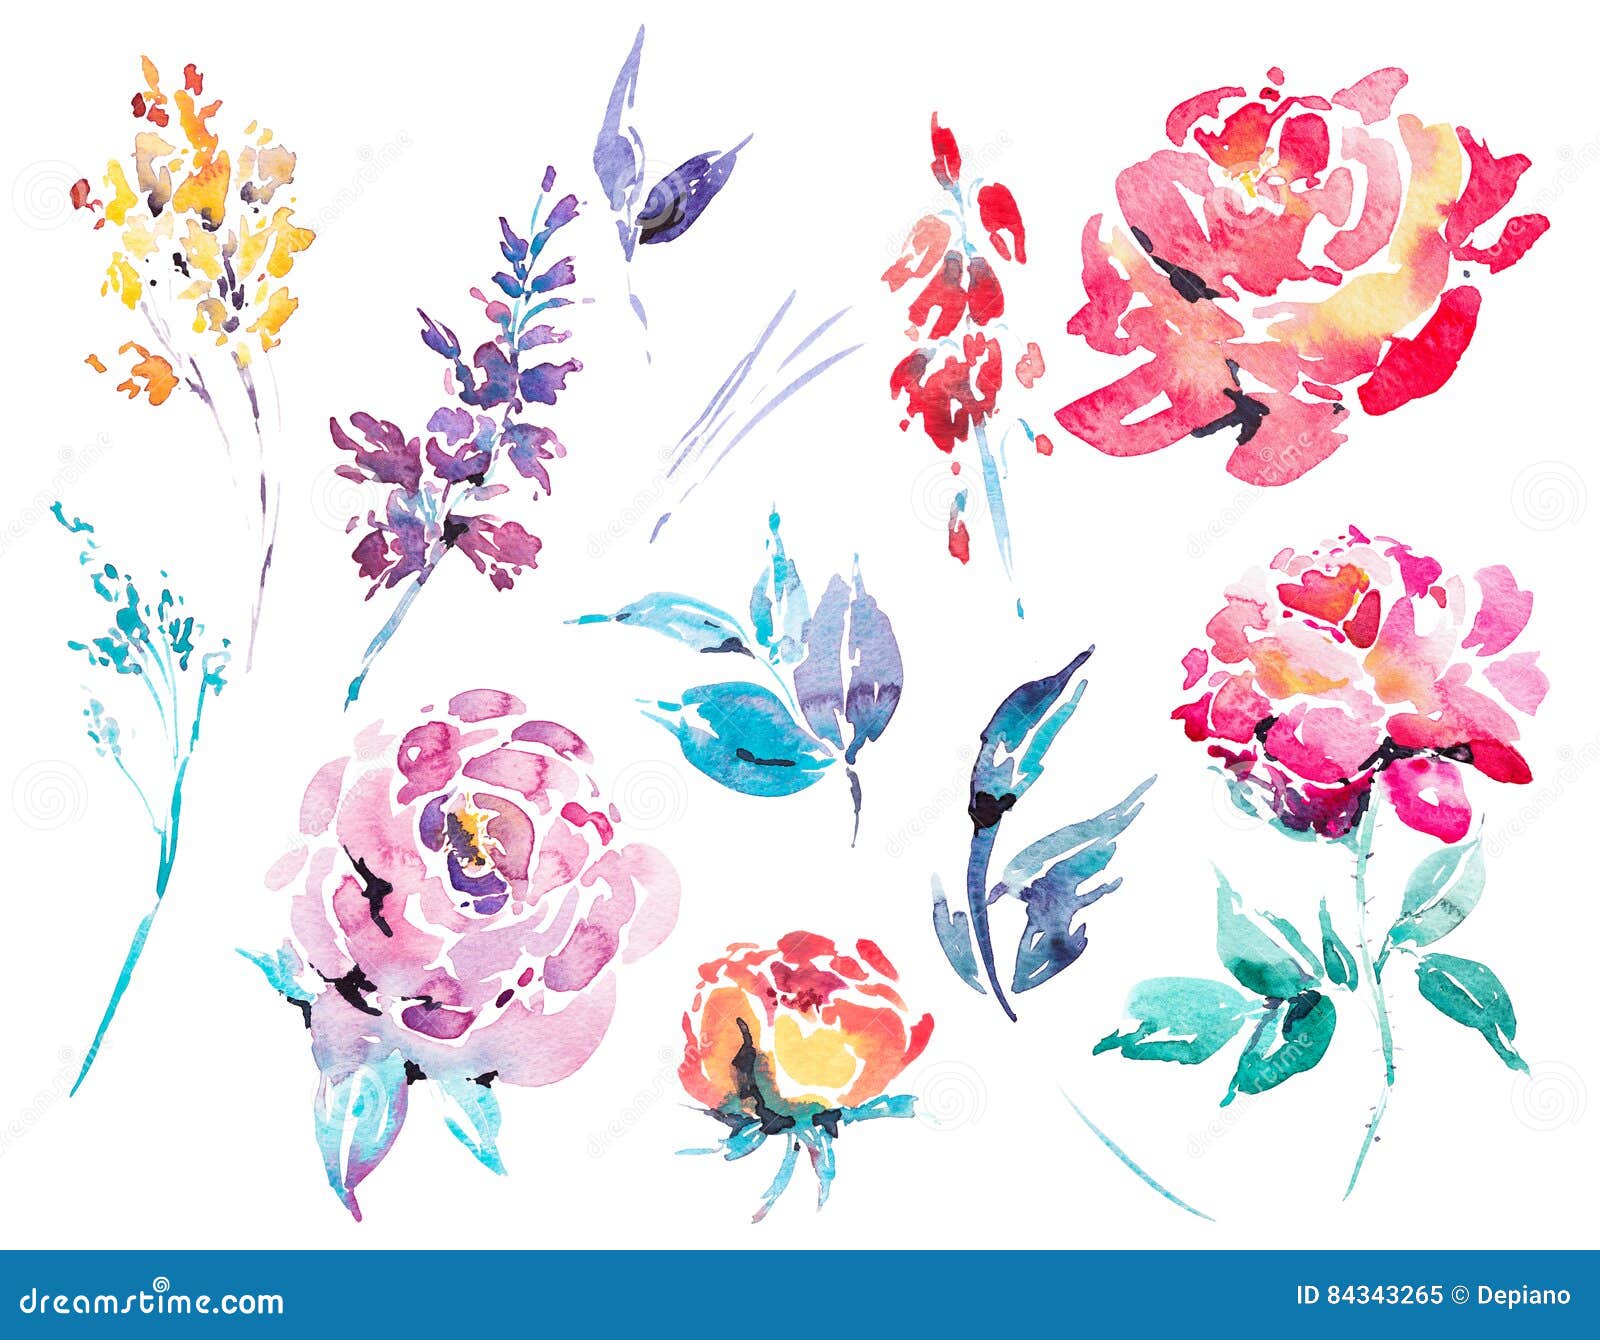 Watercolor Floral Isolated Design Elements Stock Illustration ...